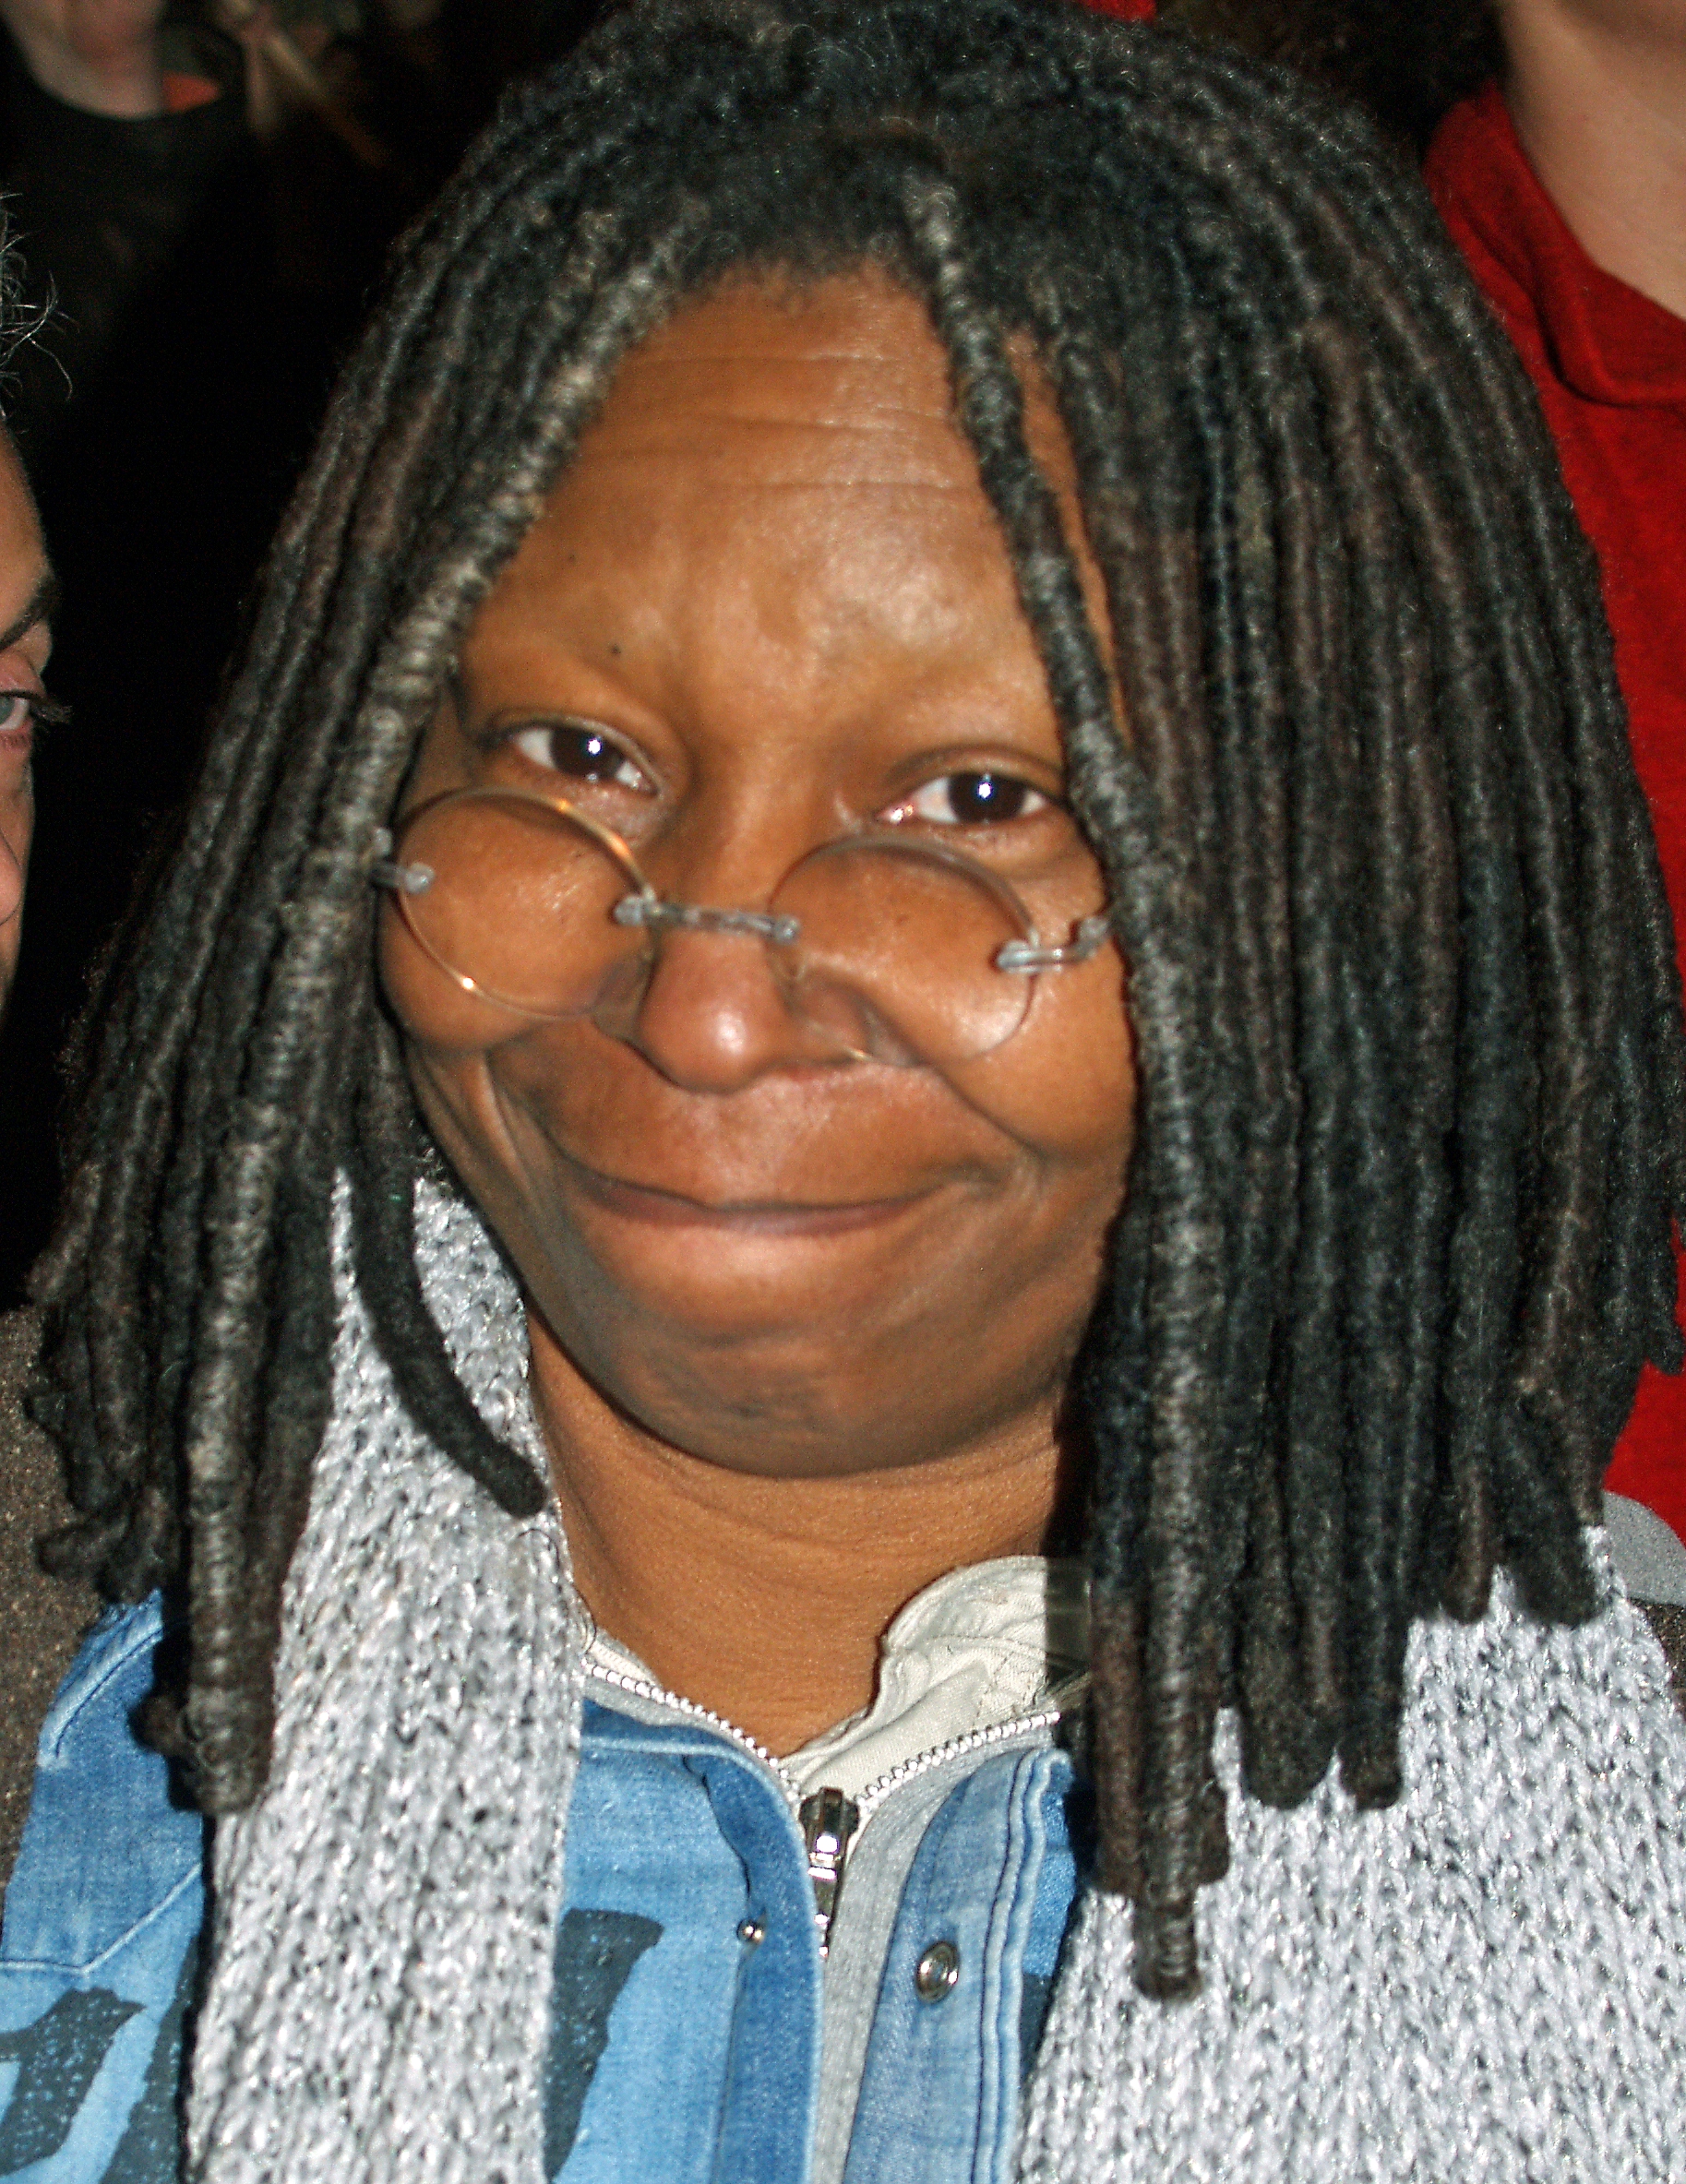 Why Doesn’t Whoopi Goldberg Have Eyebrows?